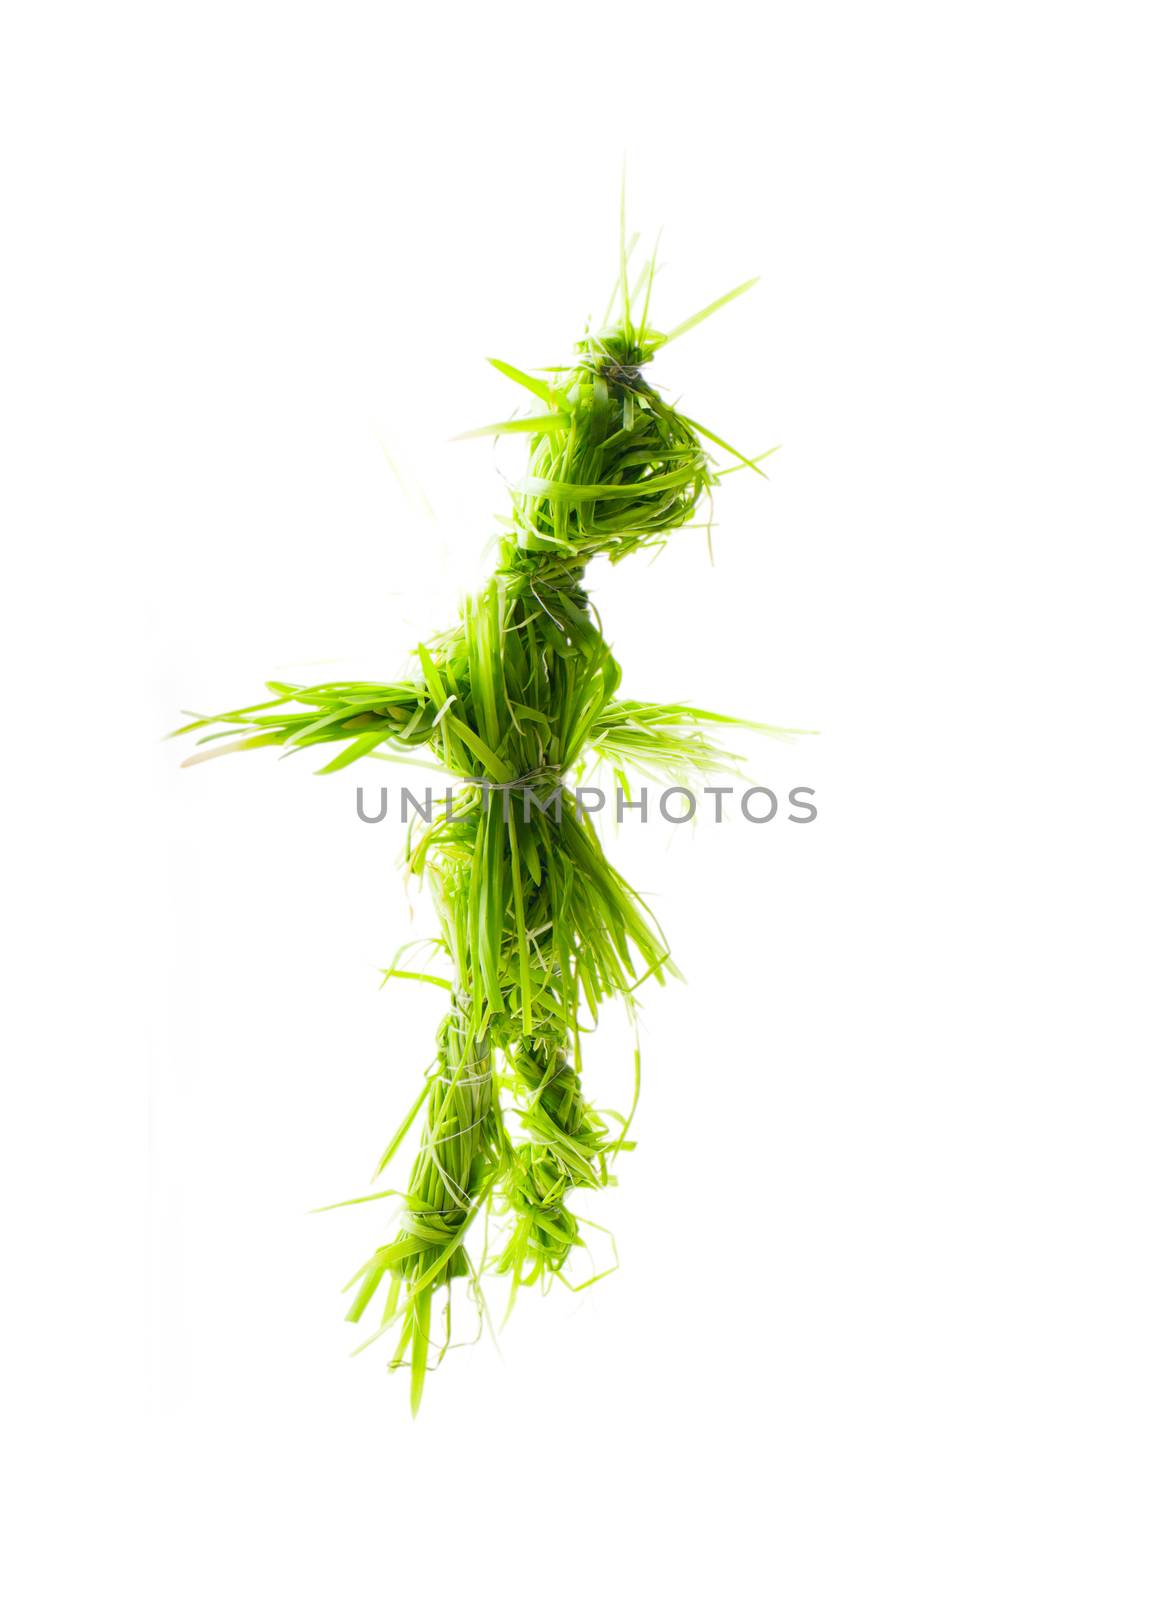 Hanging doll of green grass rotates on its axis. A genus of African divination.